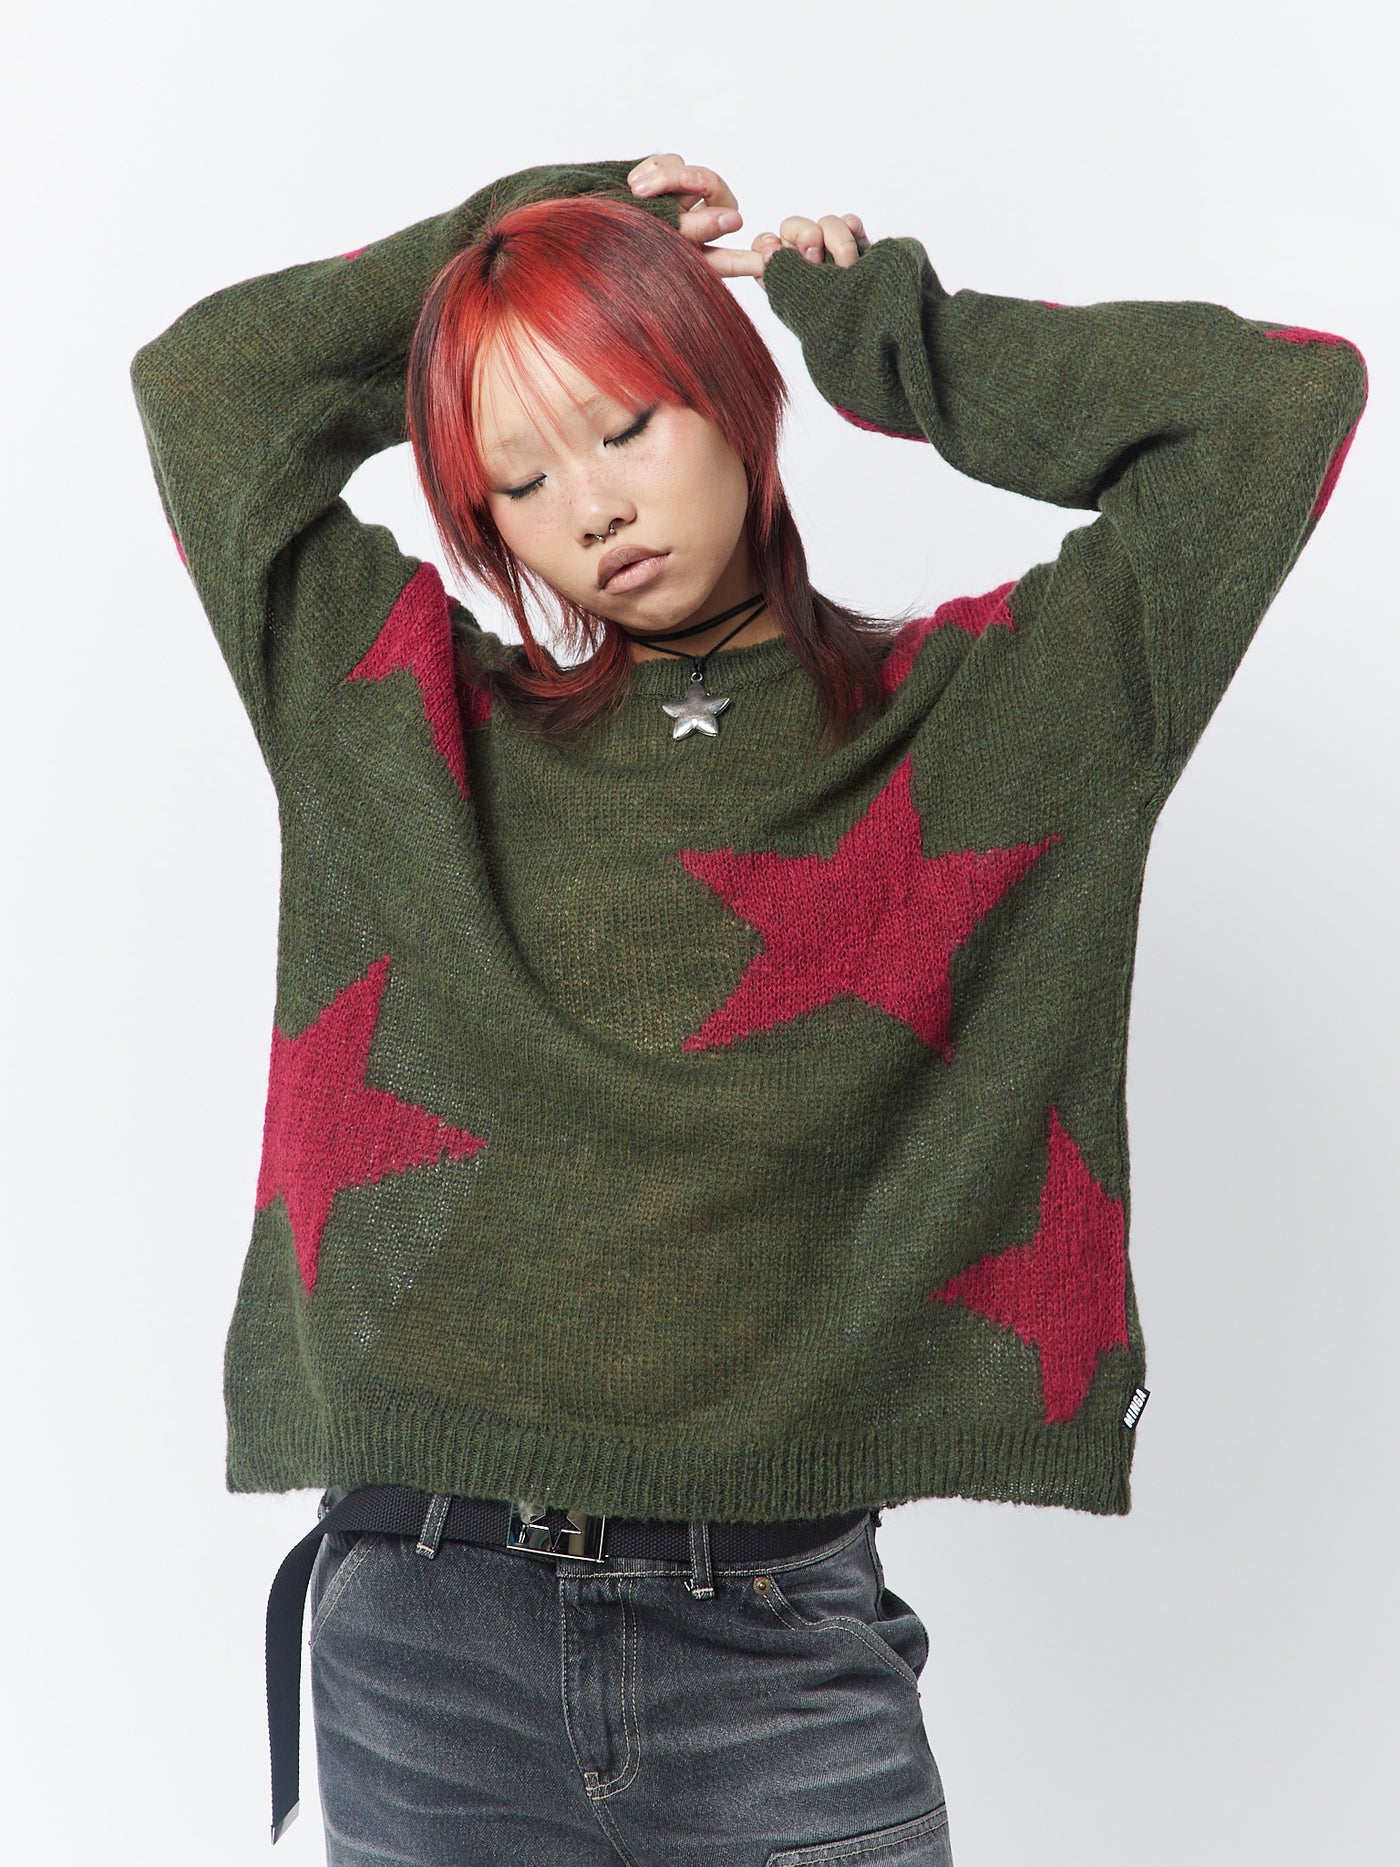 Pink and khaki knit sweater with stars design, perfect for a cozy and stylish look.